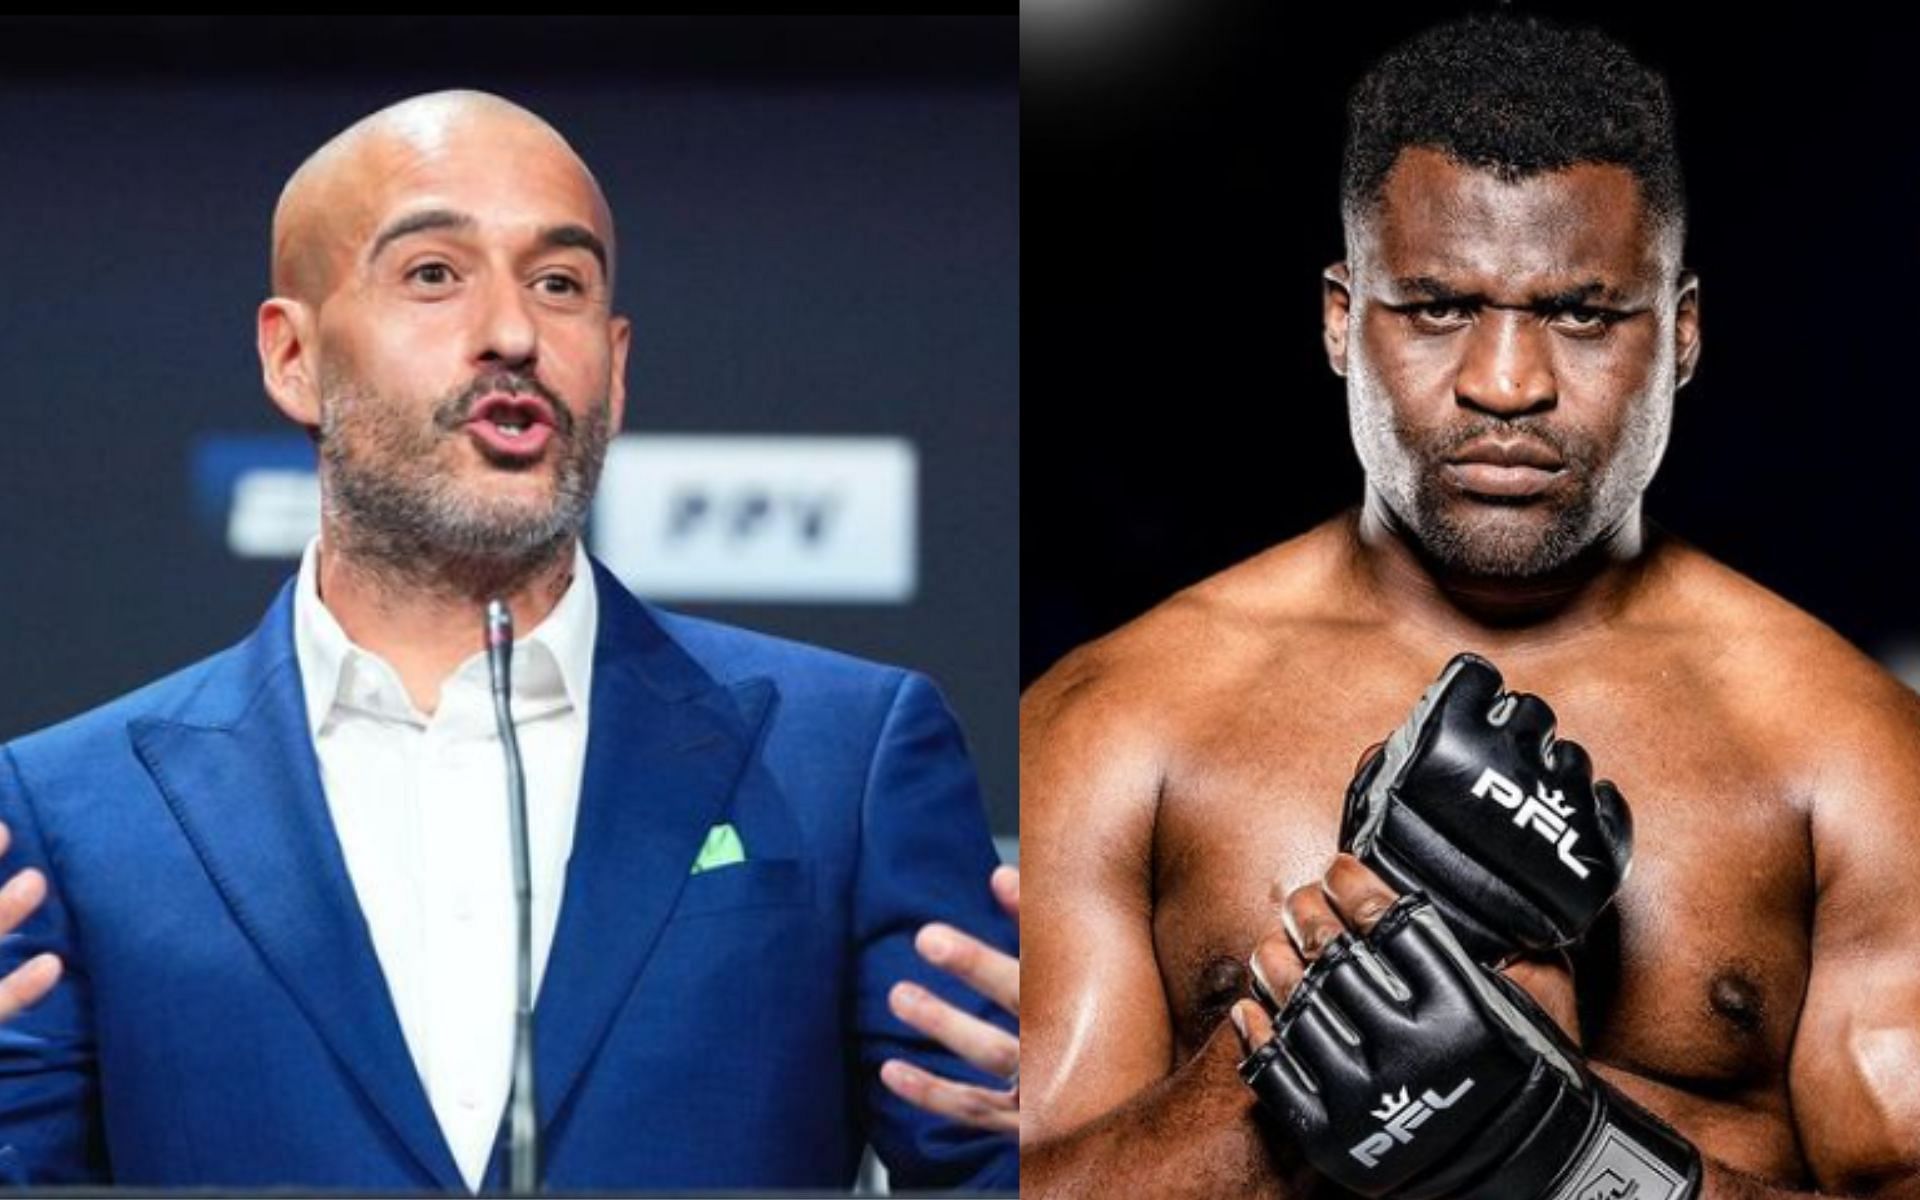 Jon Anik (Left) and Francis Ngannou (Right) [Images via: @jon_anik and @francisngannou on Instagram]